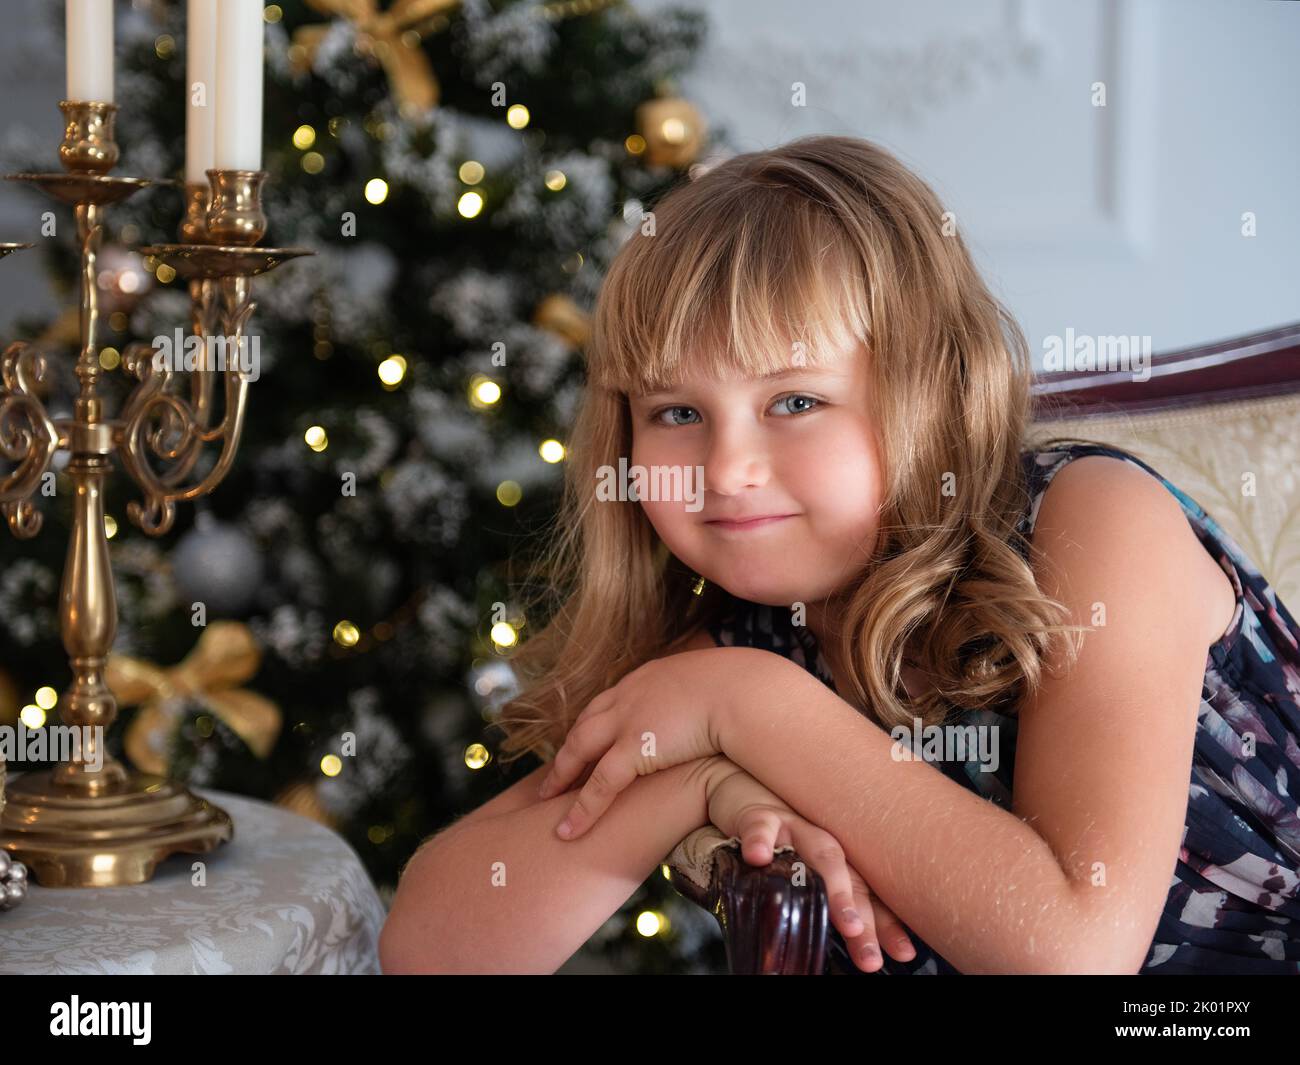 The little girl is sitting in a beautiful dress. New Year's decor. Stock Photo